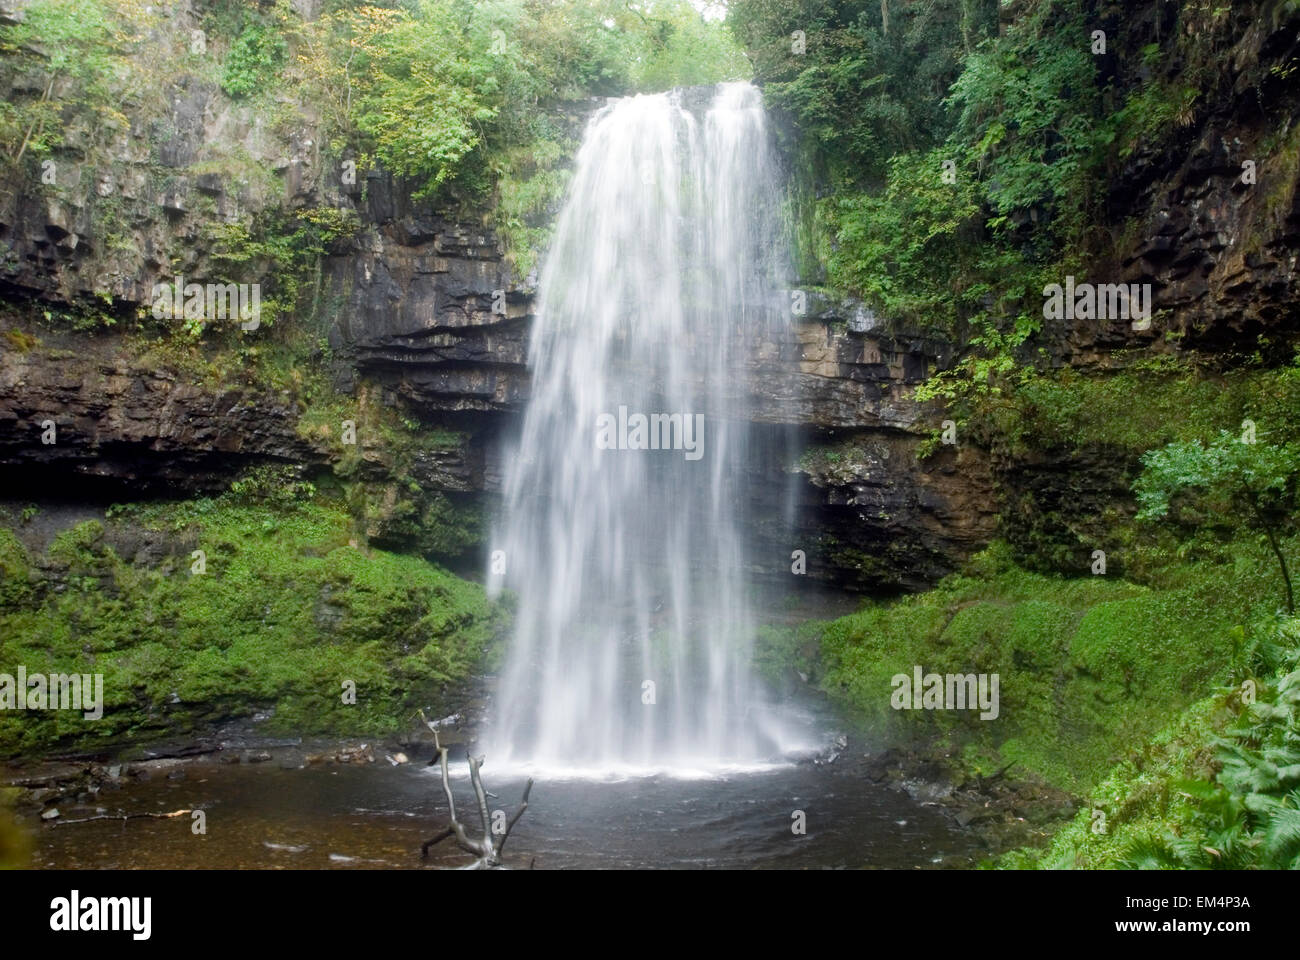 Waterfall Henrhyd Falls in Soutwales England Europe with longtime exposure Stock Photo